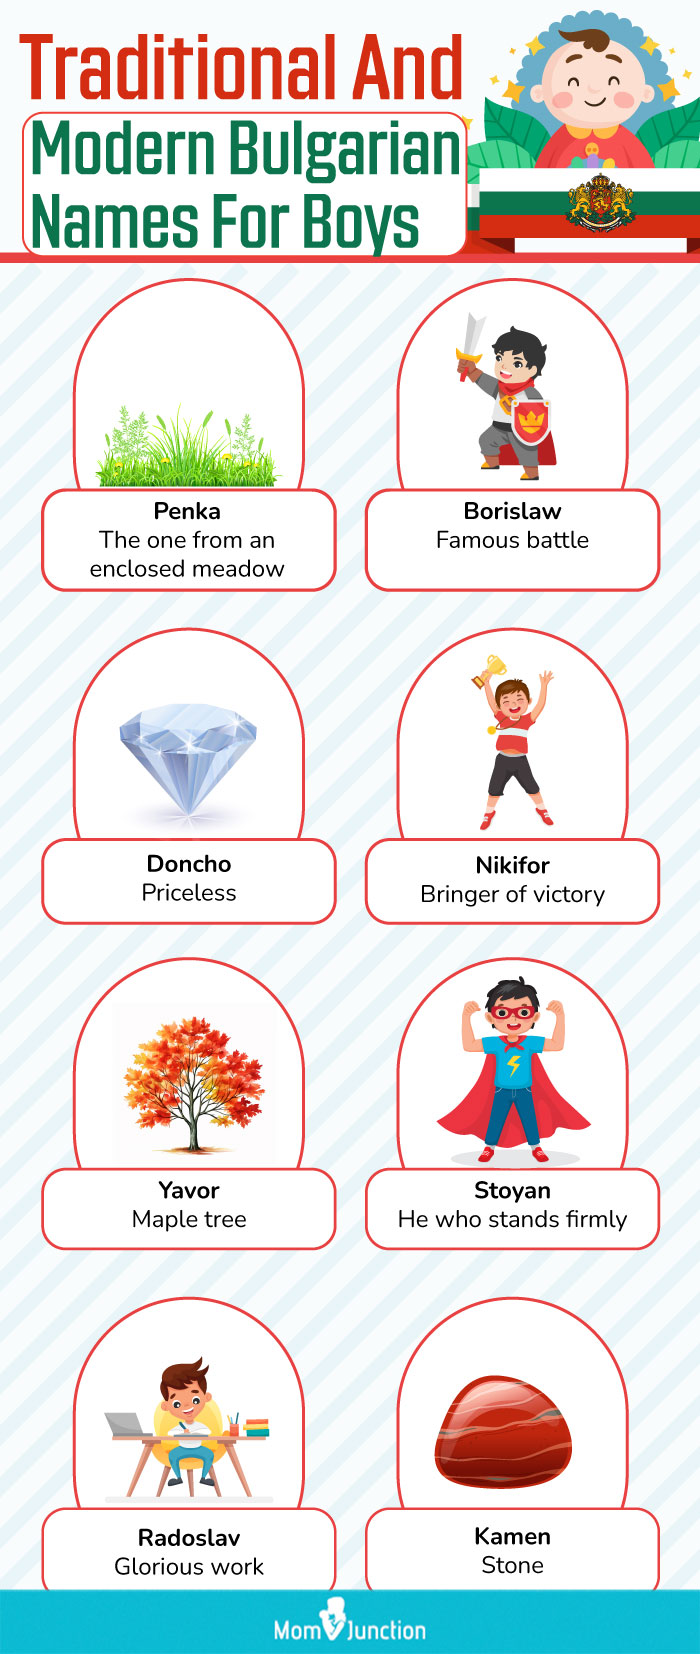 traditional and modern bulgarian names for boys (infographic)